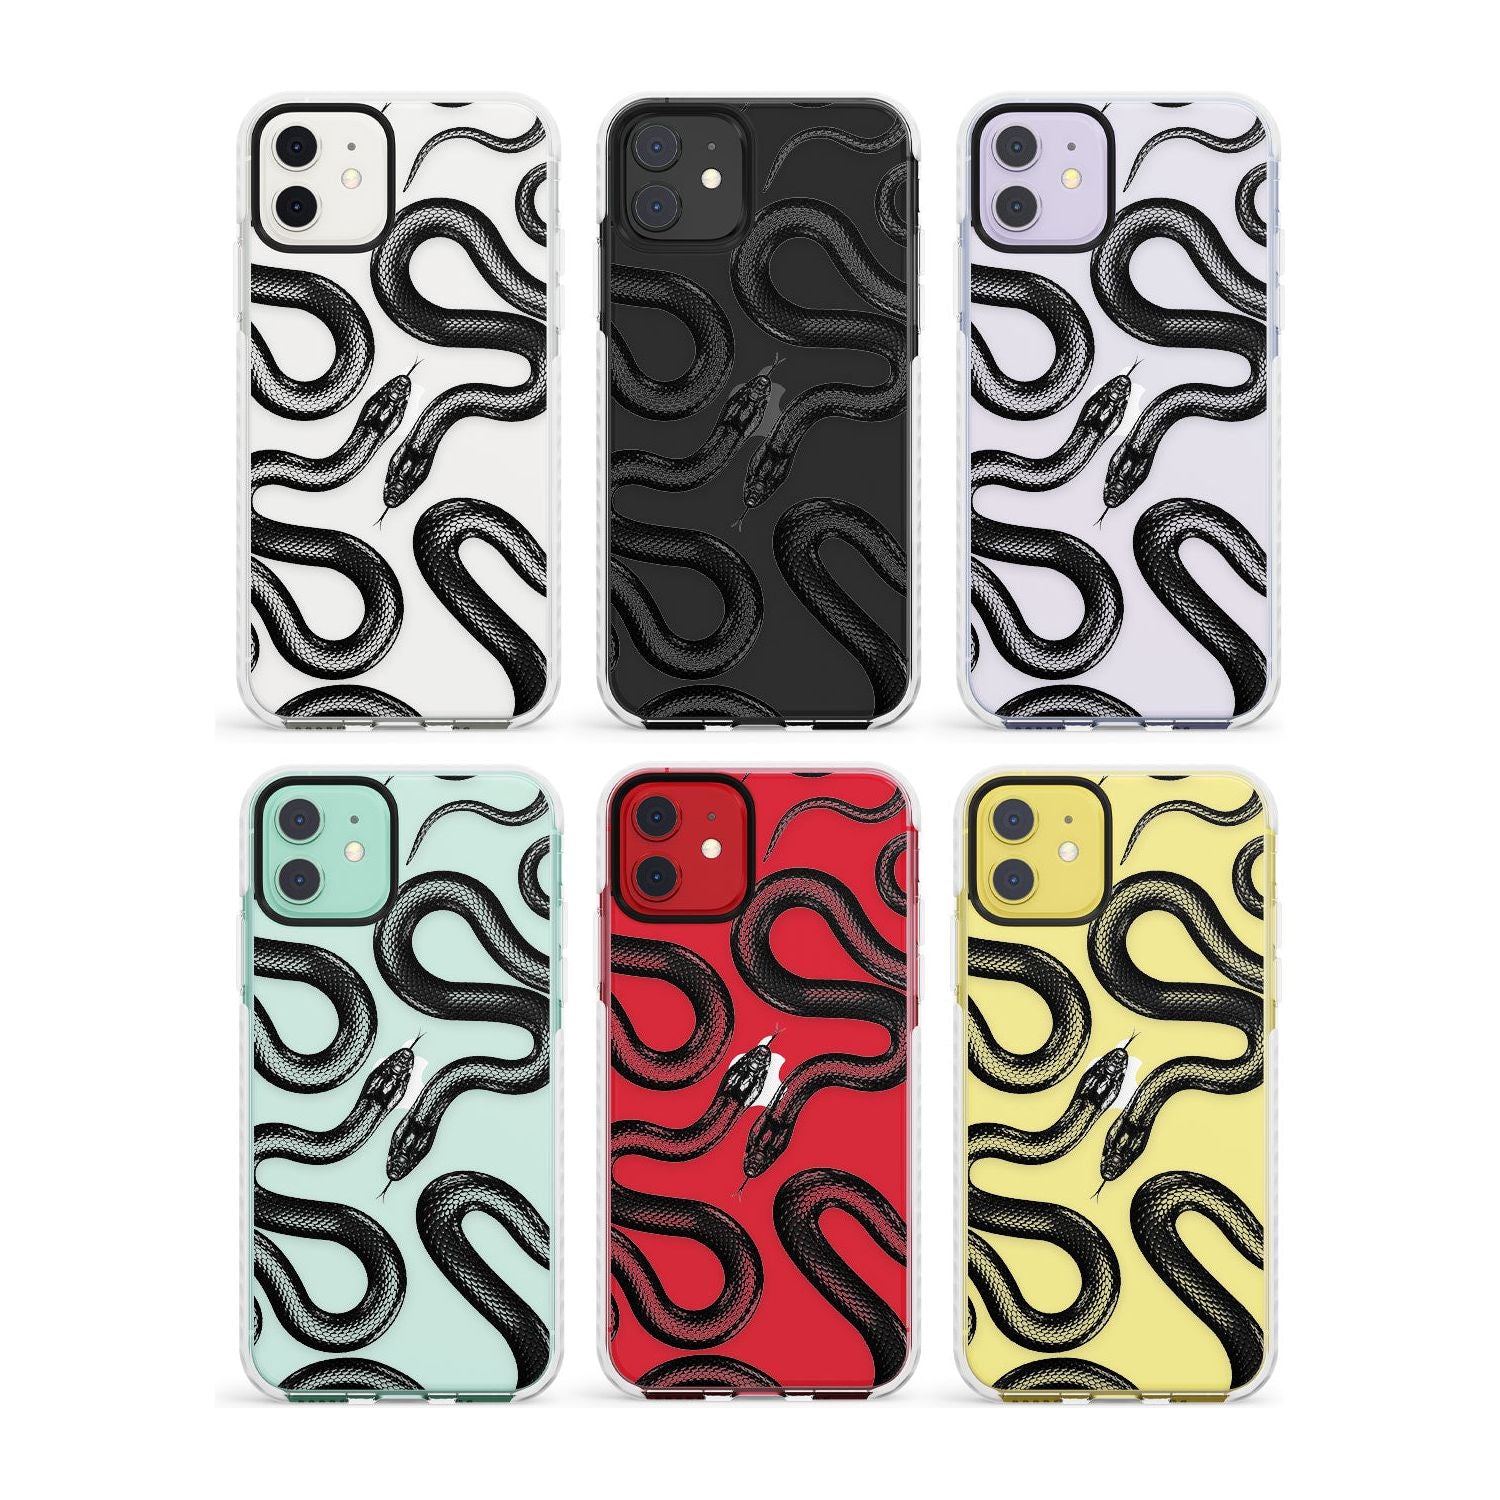 Snakes Impact Phone Case for iPhone 11, iphone 12